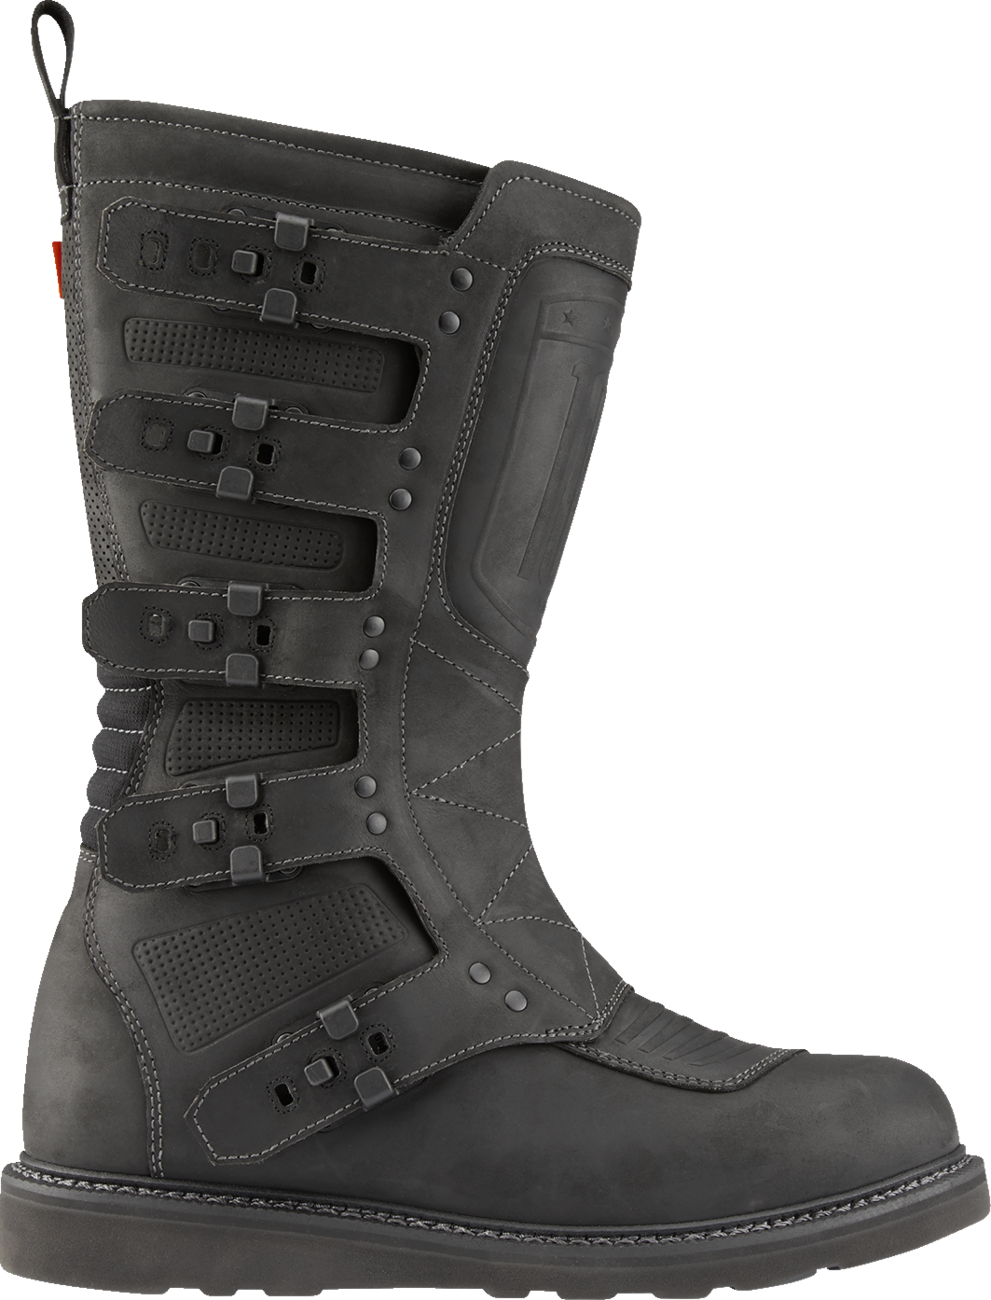 ICON Elsinore 2™ CE Boots - Black - Size 8 3403-1209